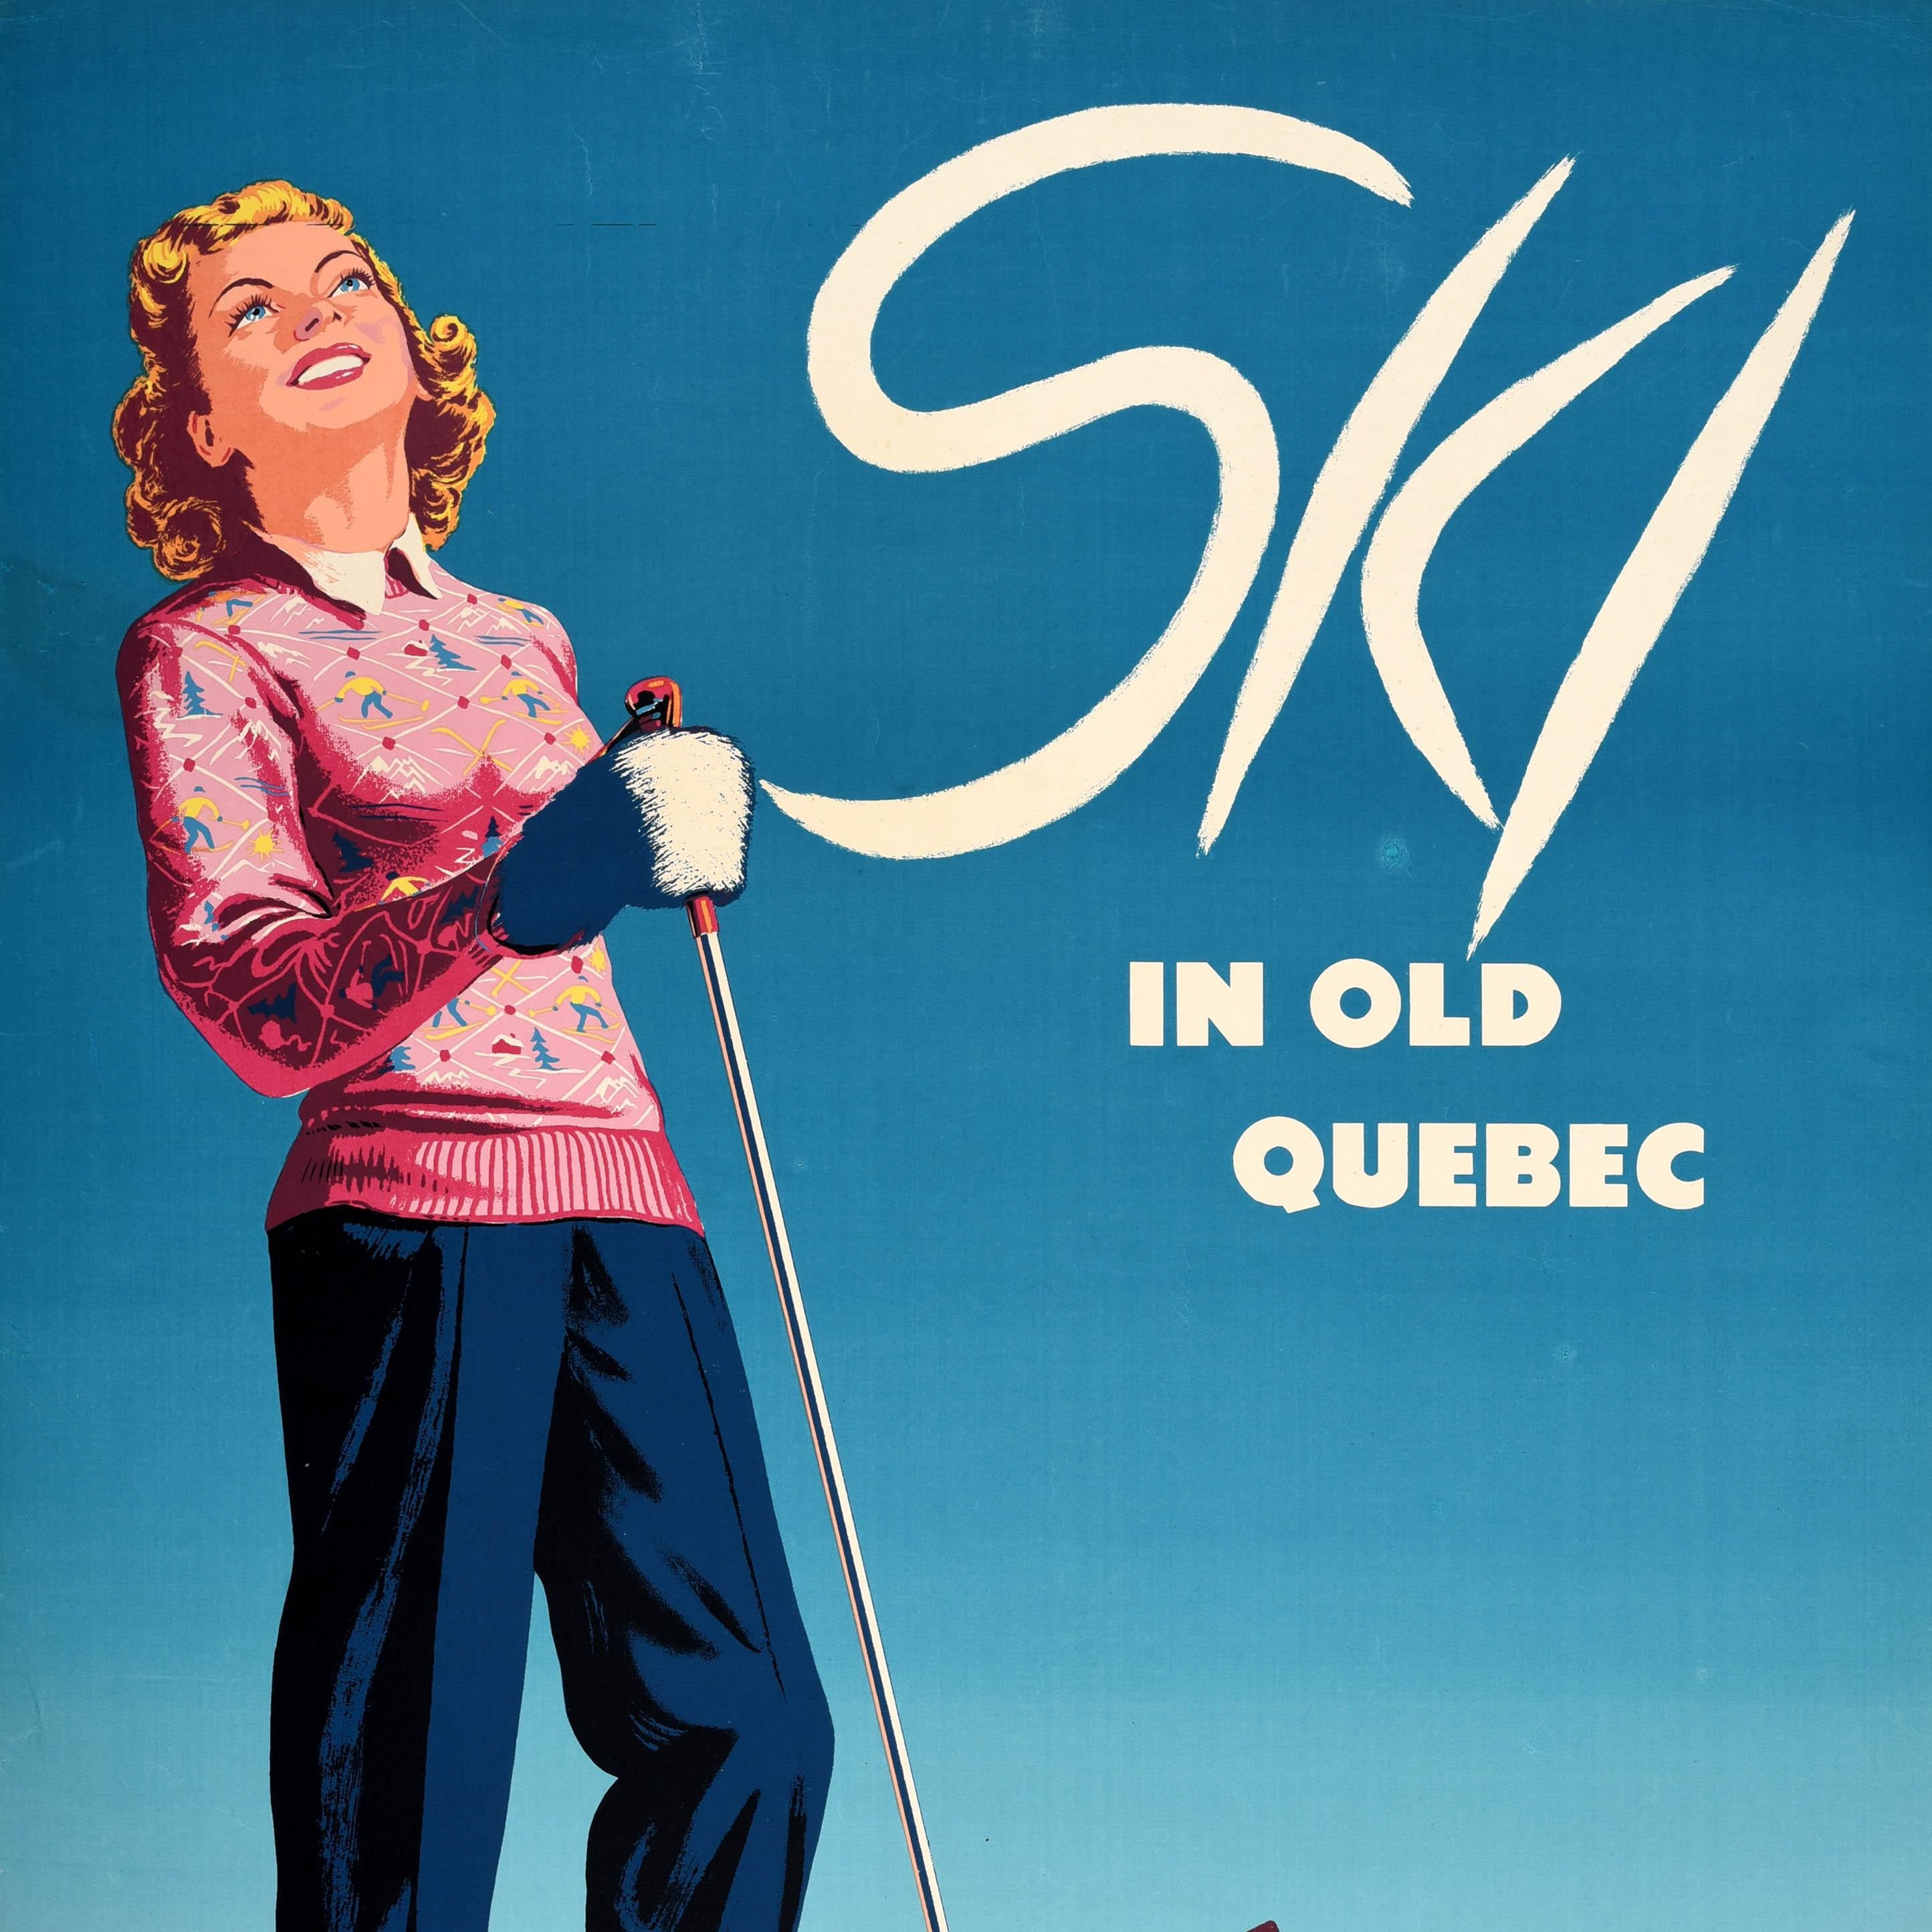 Original vintage winter sport poster - Ski in Old Quebec Chateau Frontenac - featuring stunning artwork depicting a smiling lady with blonde hair wearing a patterned pink jumper with small images of snow covered chalets and trees, mountains and